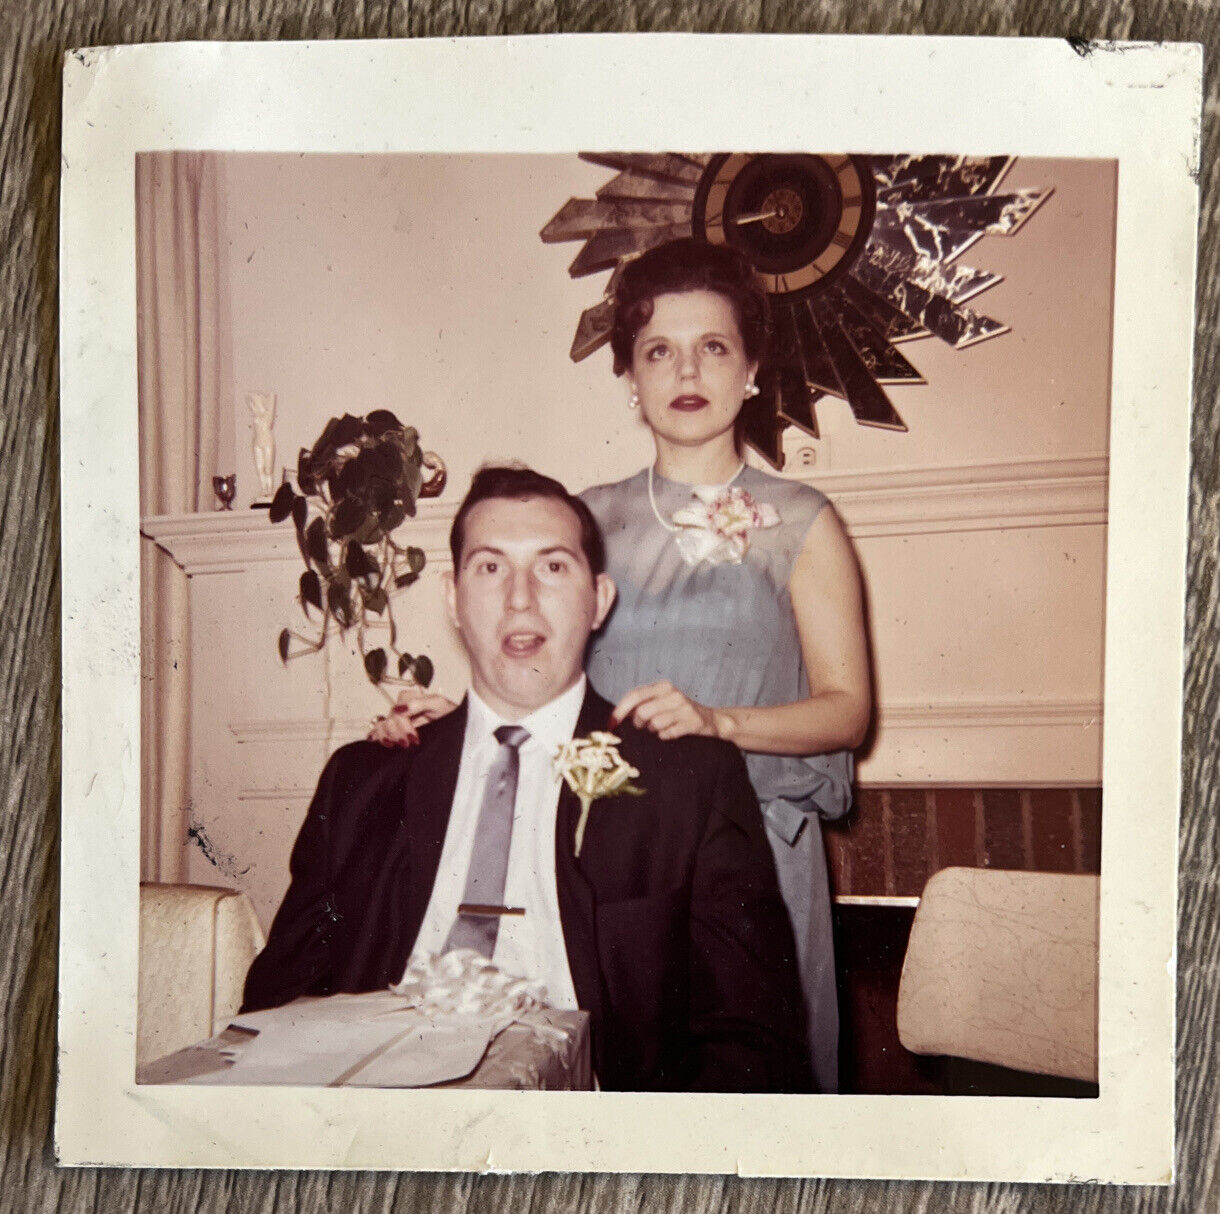 1960s Found Photo Snapshot Well Dressed Couple Poses at Party Woman Rolls Eyes